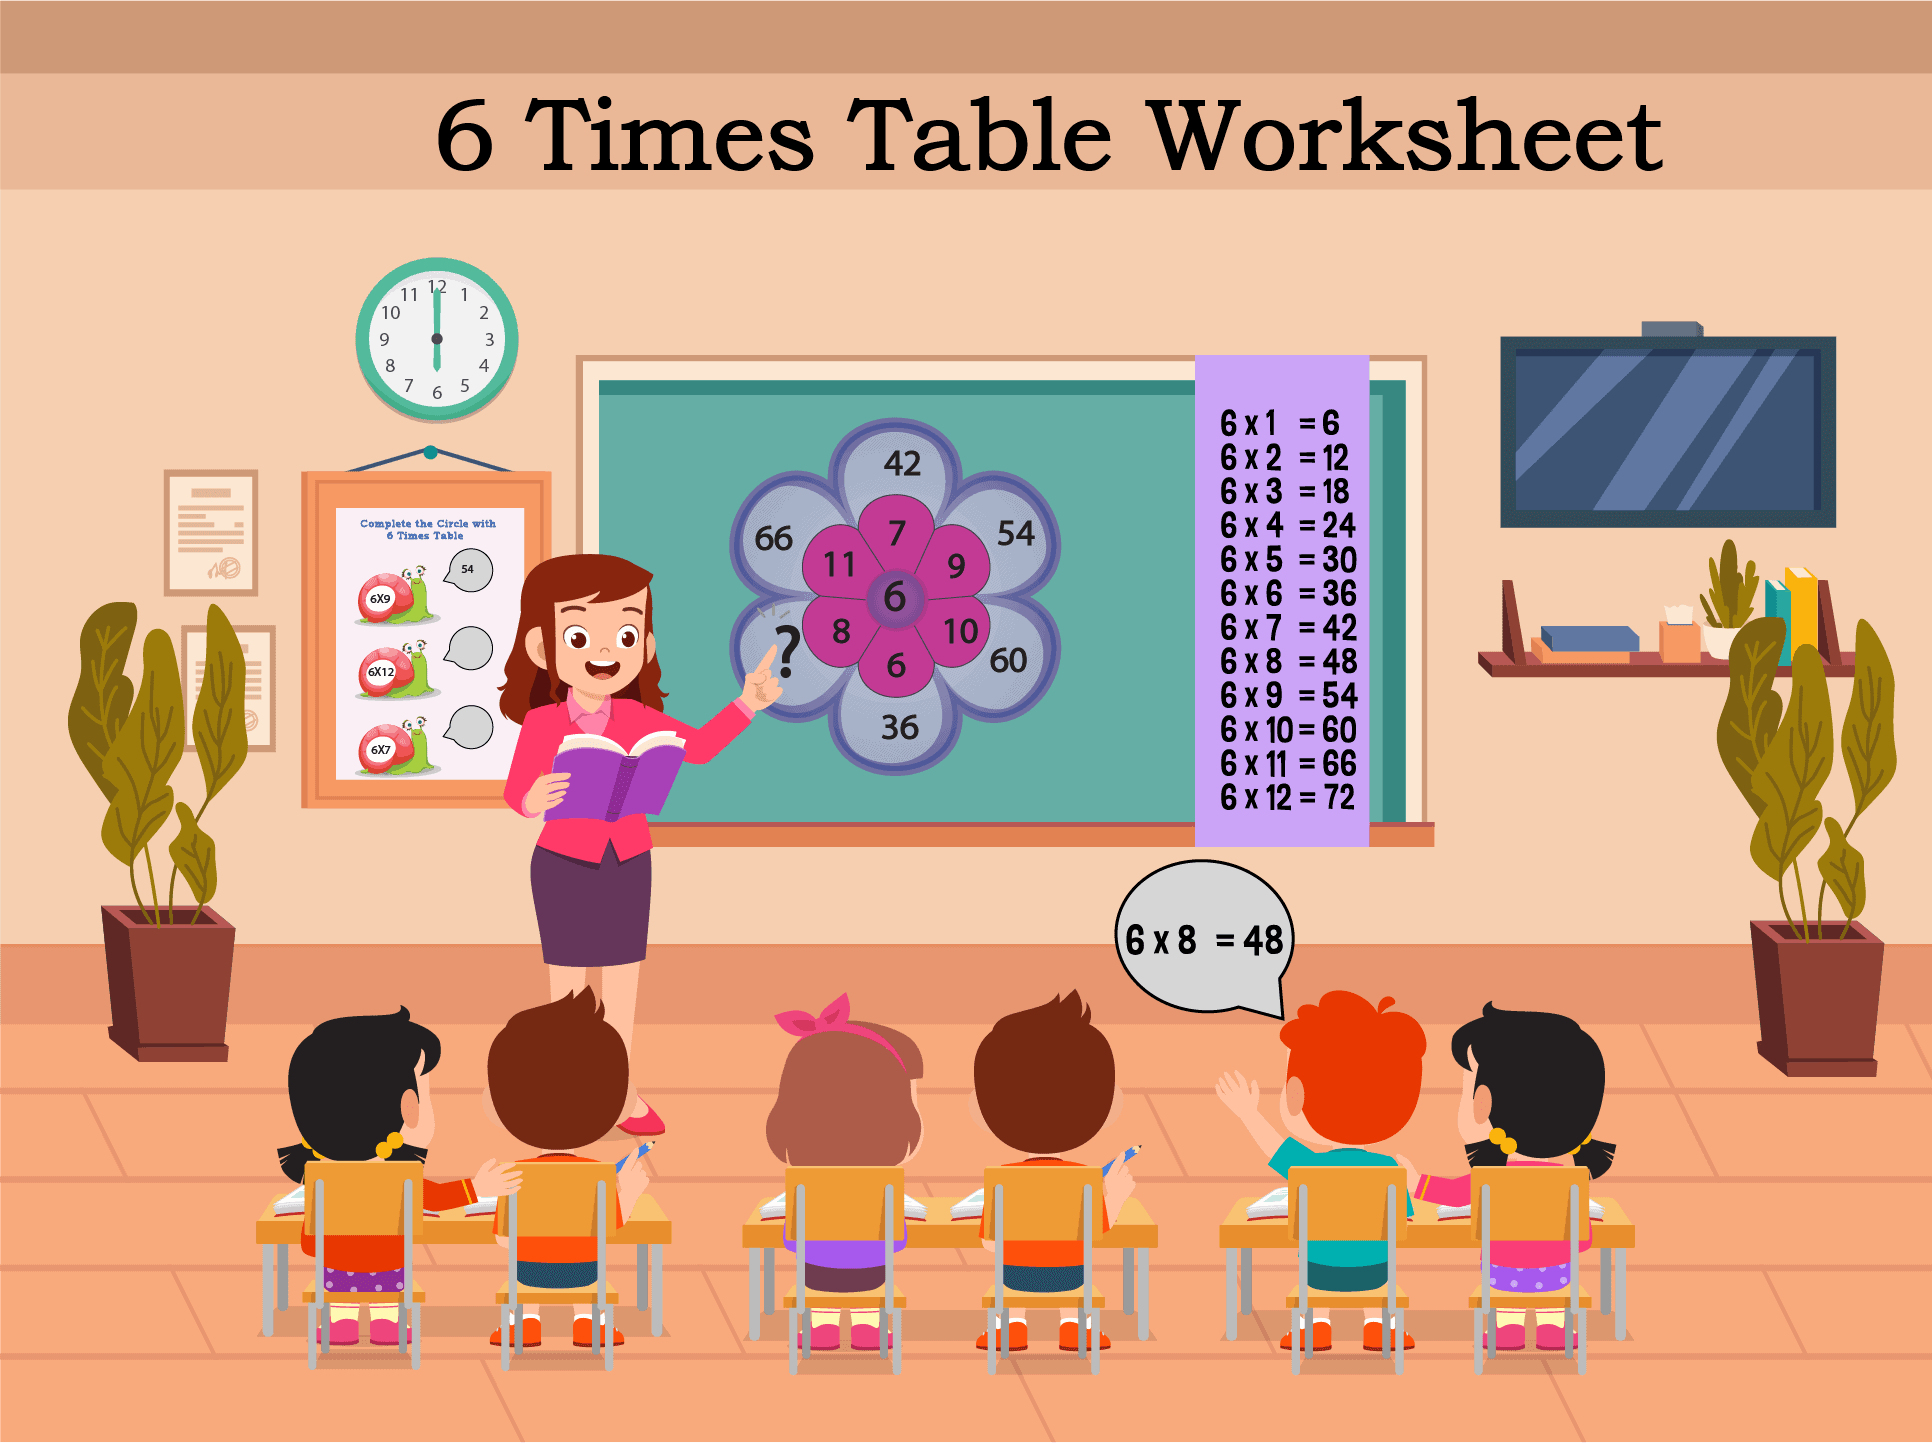 10+ 6 Times Table Worksheets | Free Printable